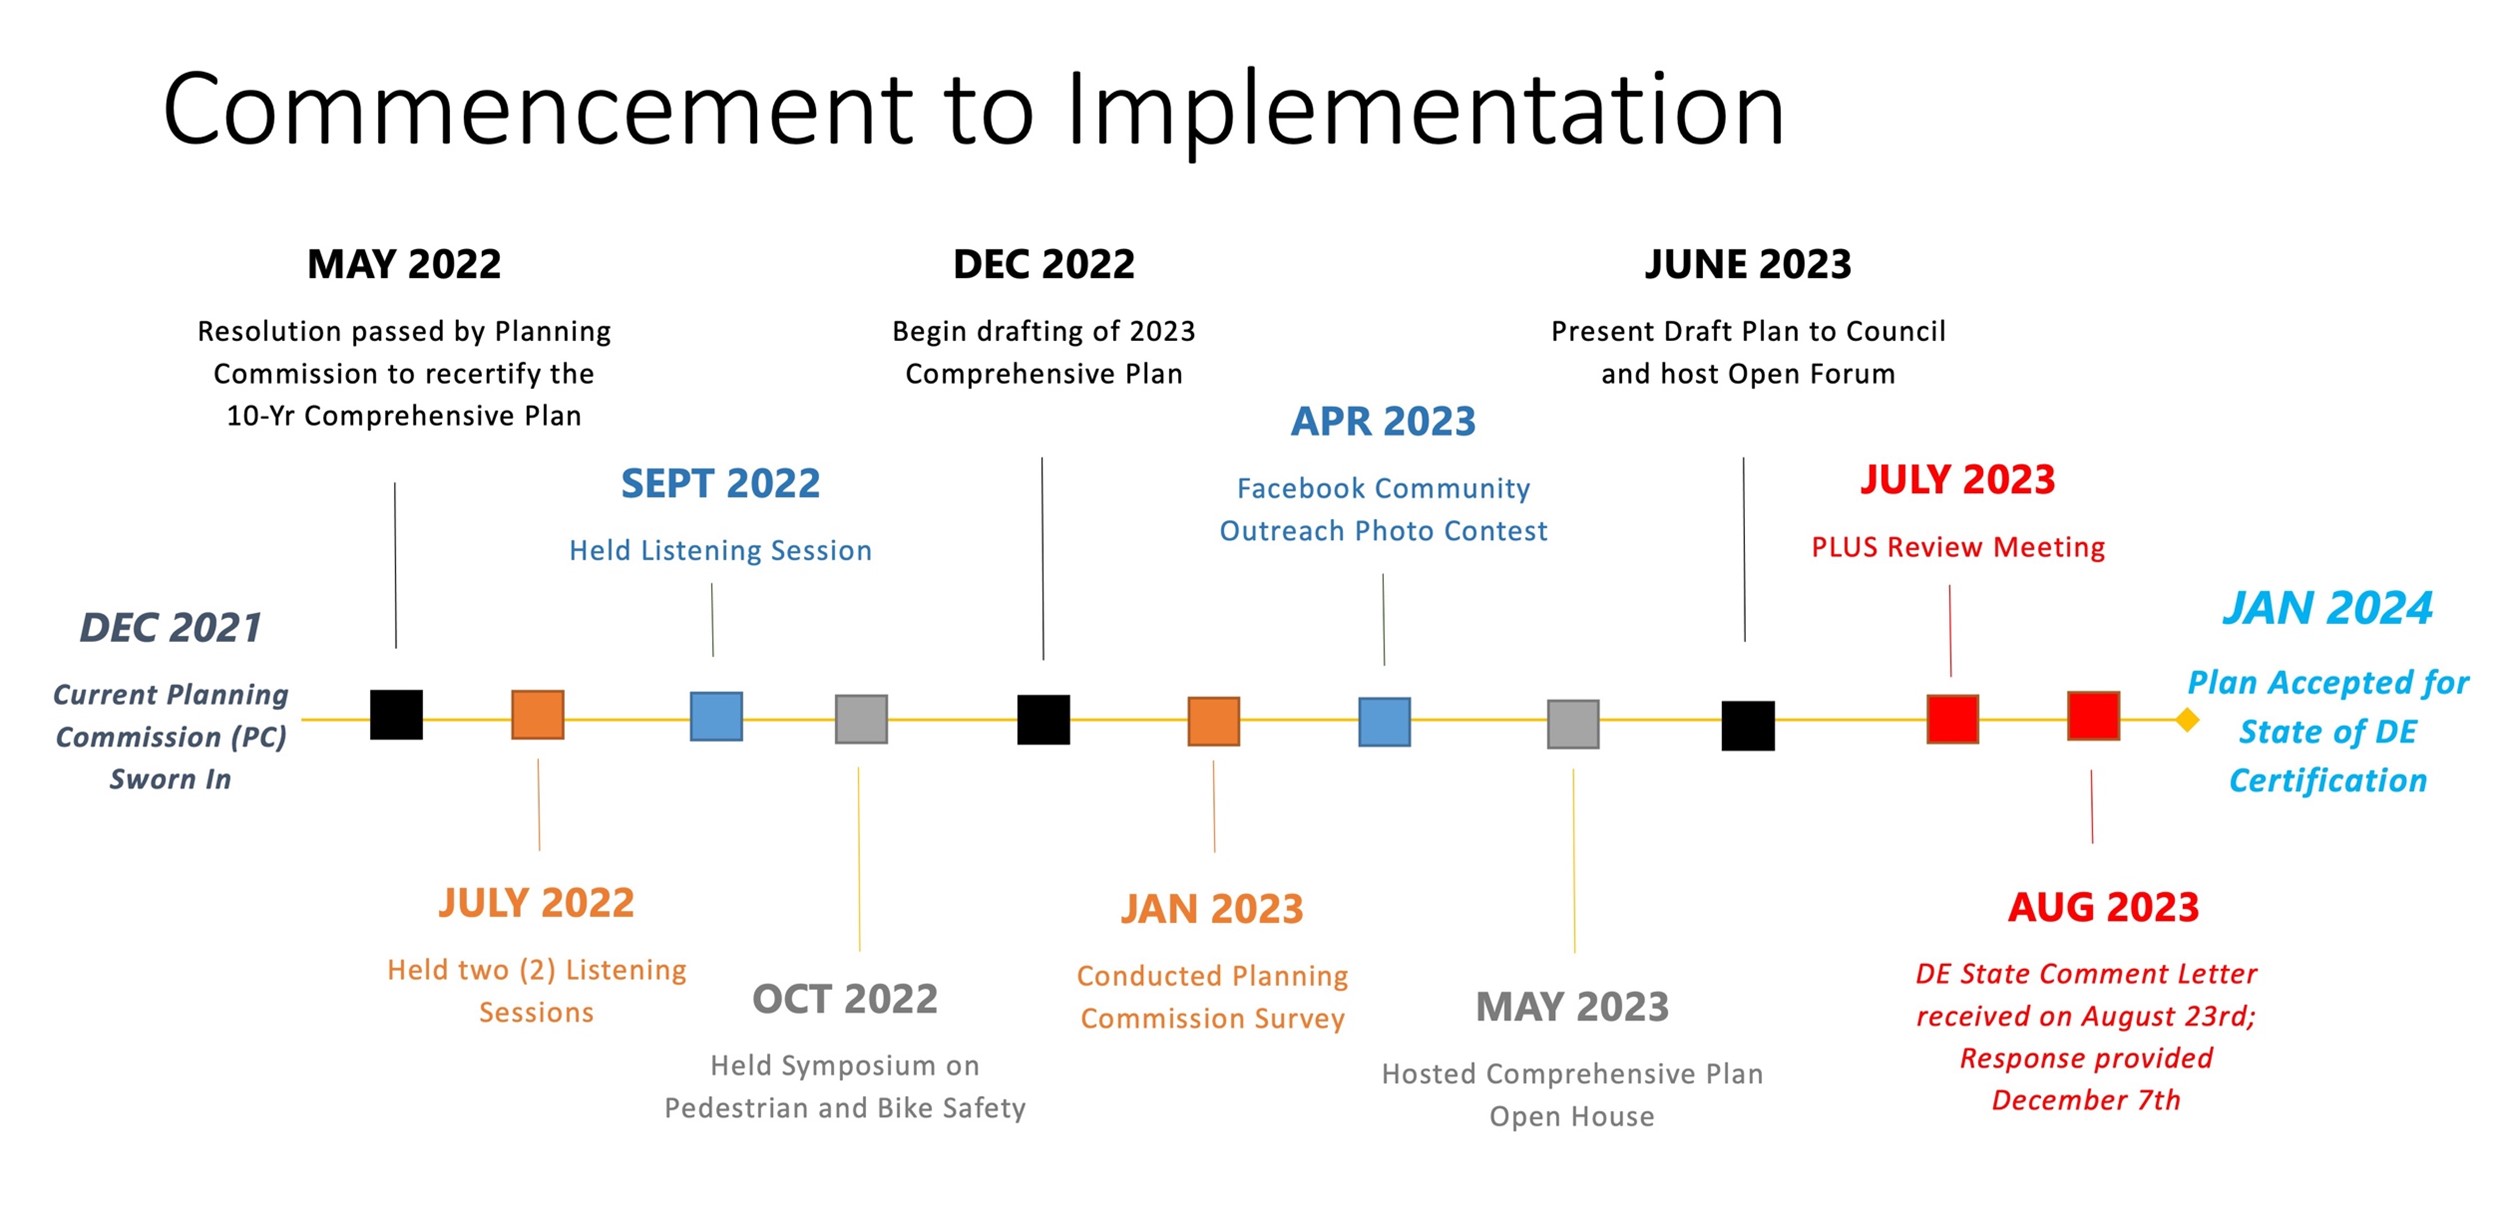 Commencement to Implementation chart